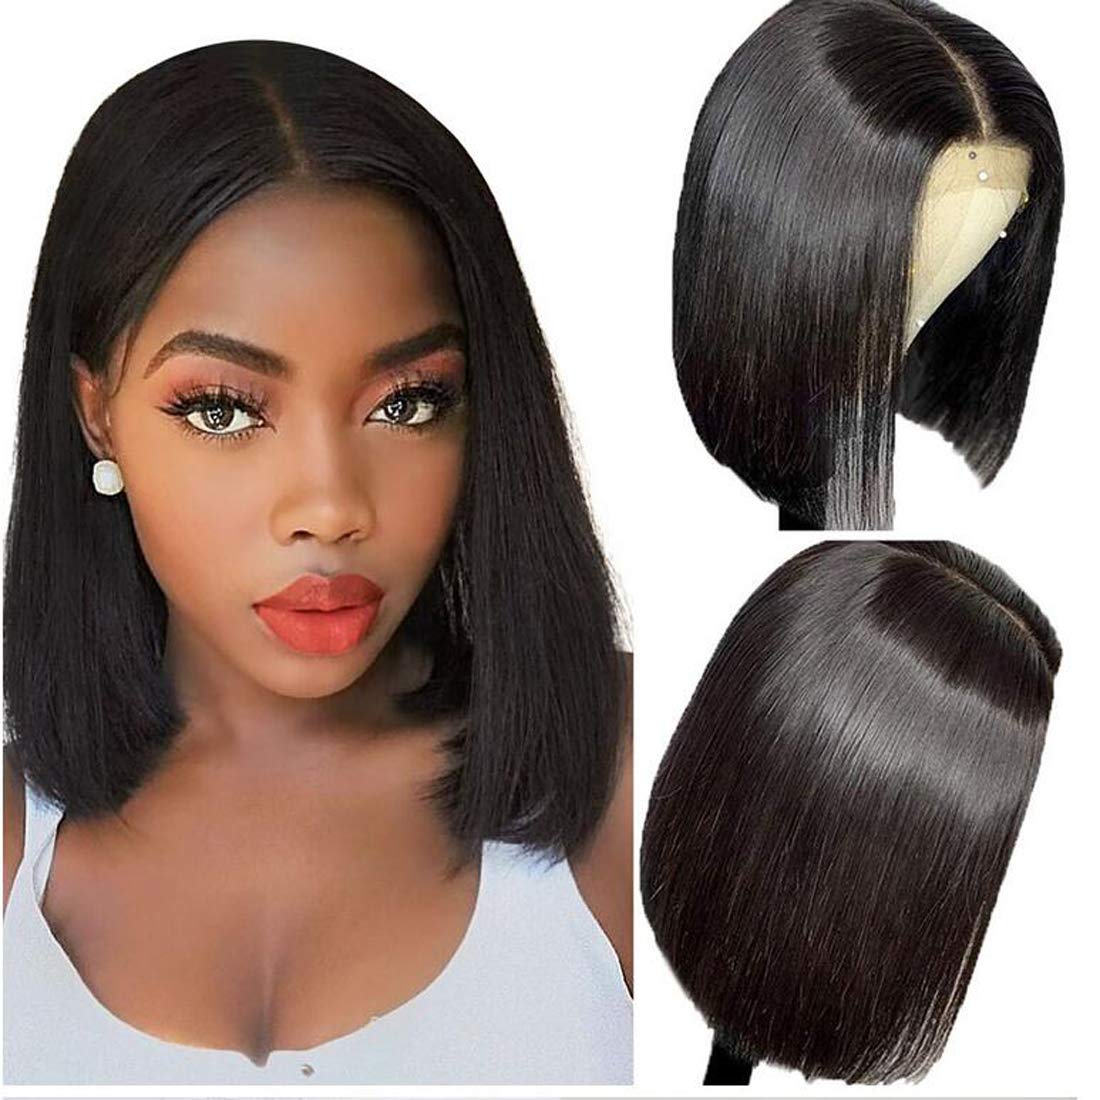 Lush Locks Glueless Short Bob Wigs for  Women Human Hair Lace Front Straight Bob Wigs Free Part Natural Color Wig